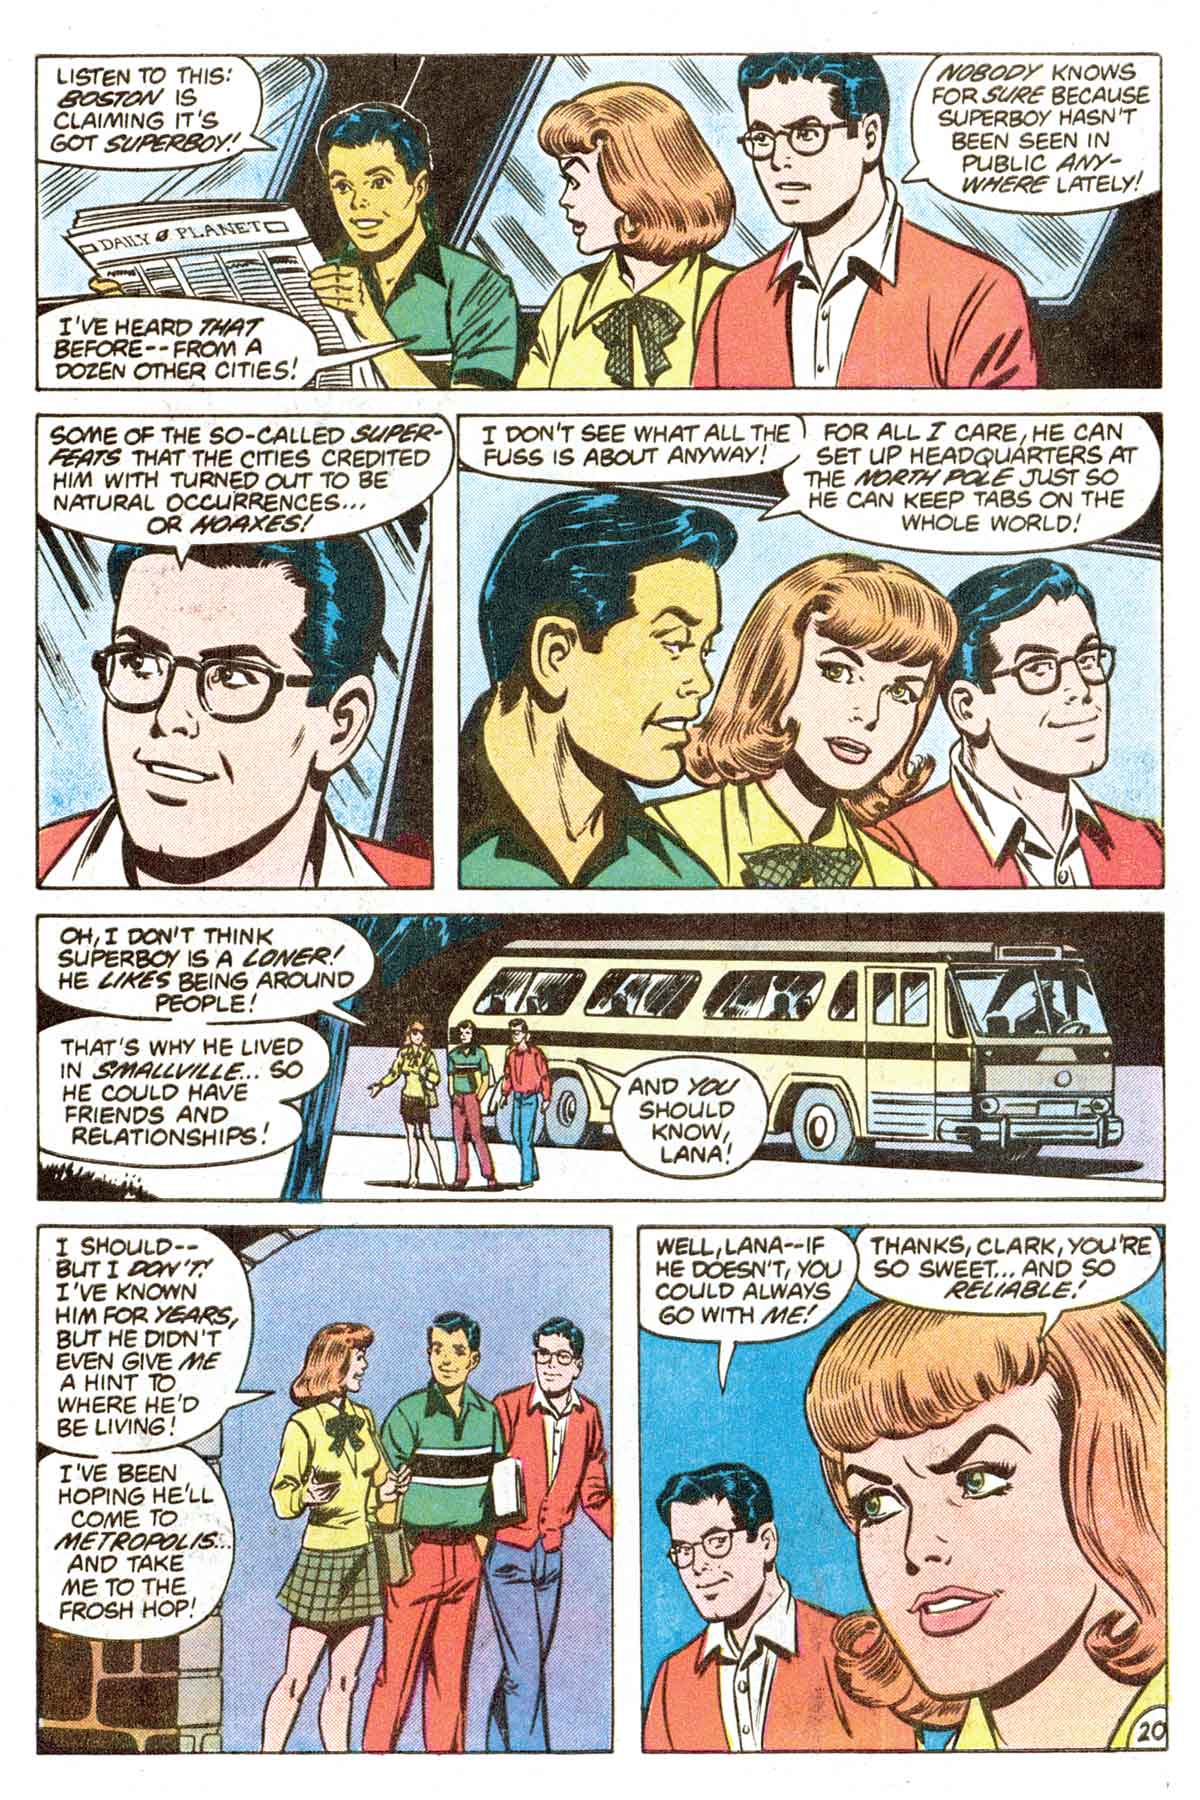 The New Adventures of Superboy 51 Page 20